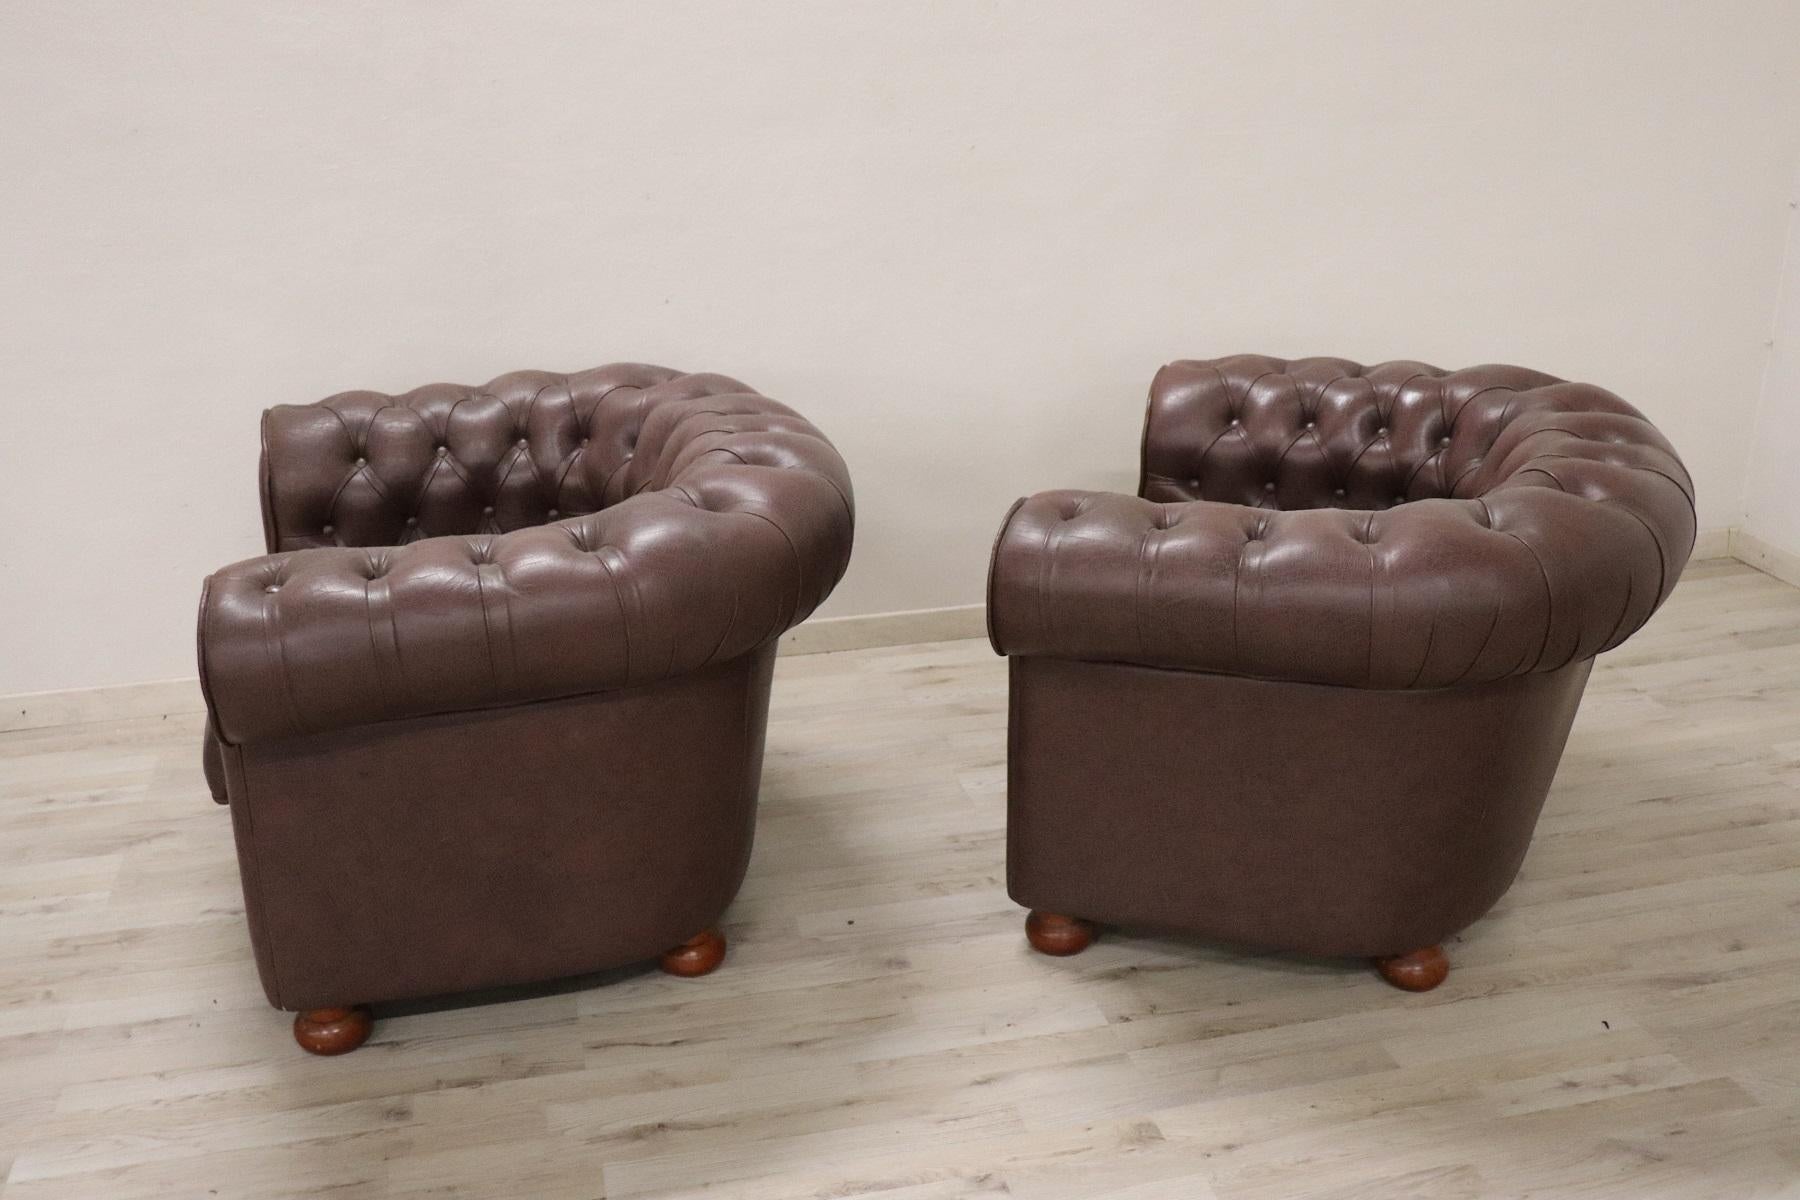 20th Century Vintage Pair of Leather English Chesterfield Armchairs 2